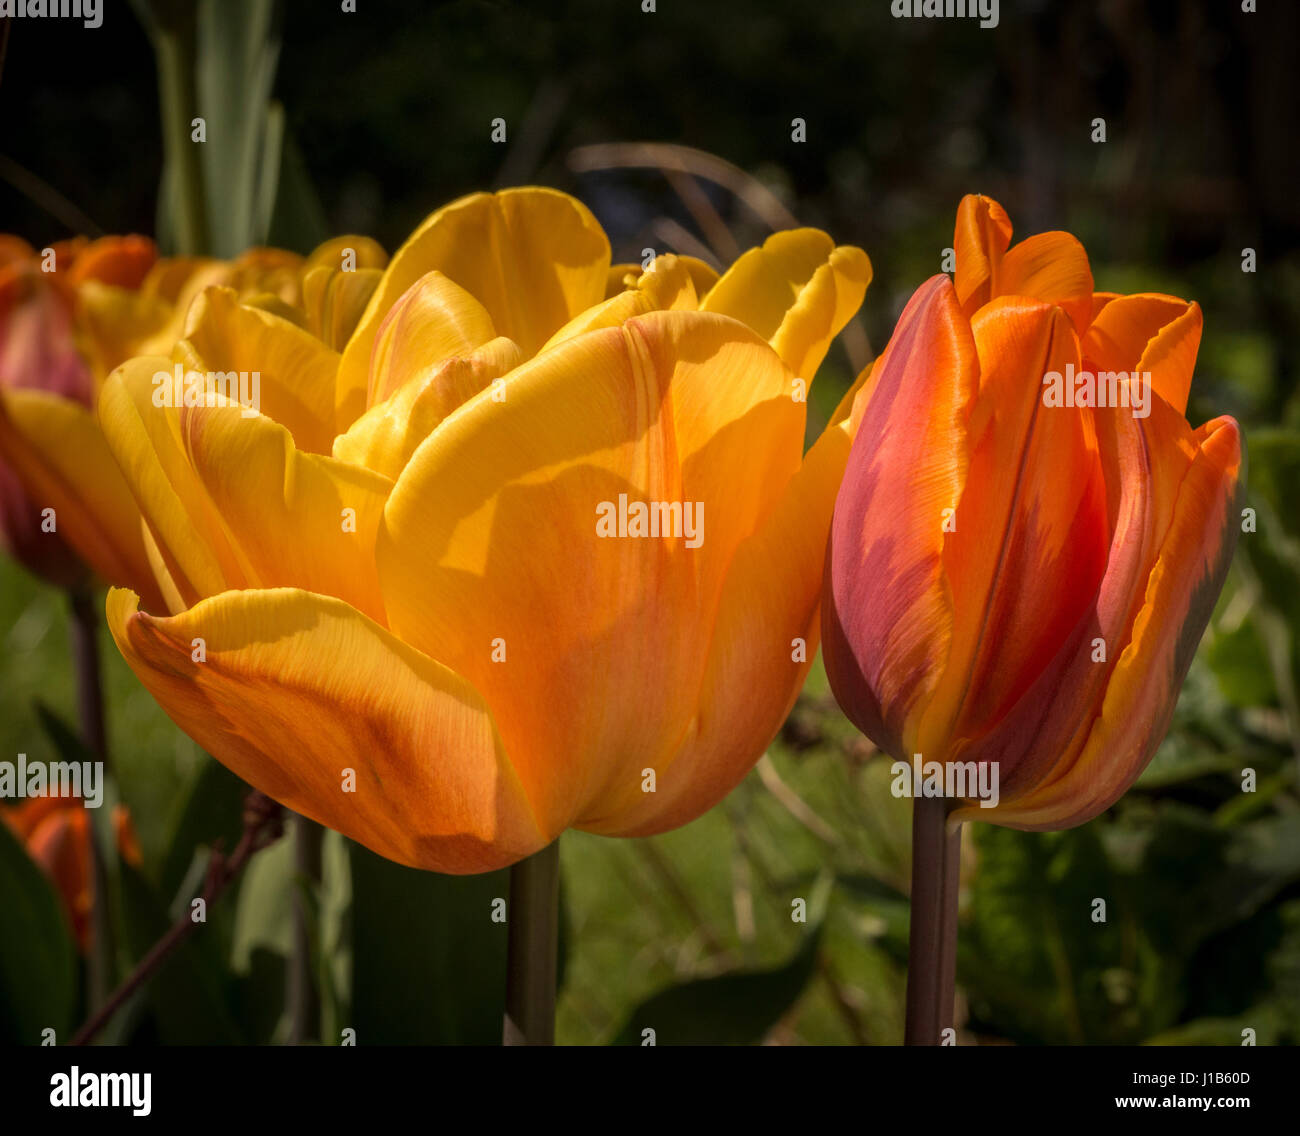 Two Princess Irene tulip flowers growing in a garden. Stock Photo